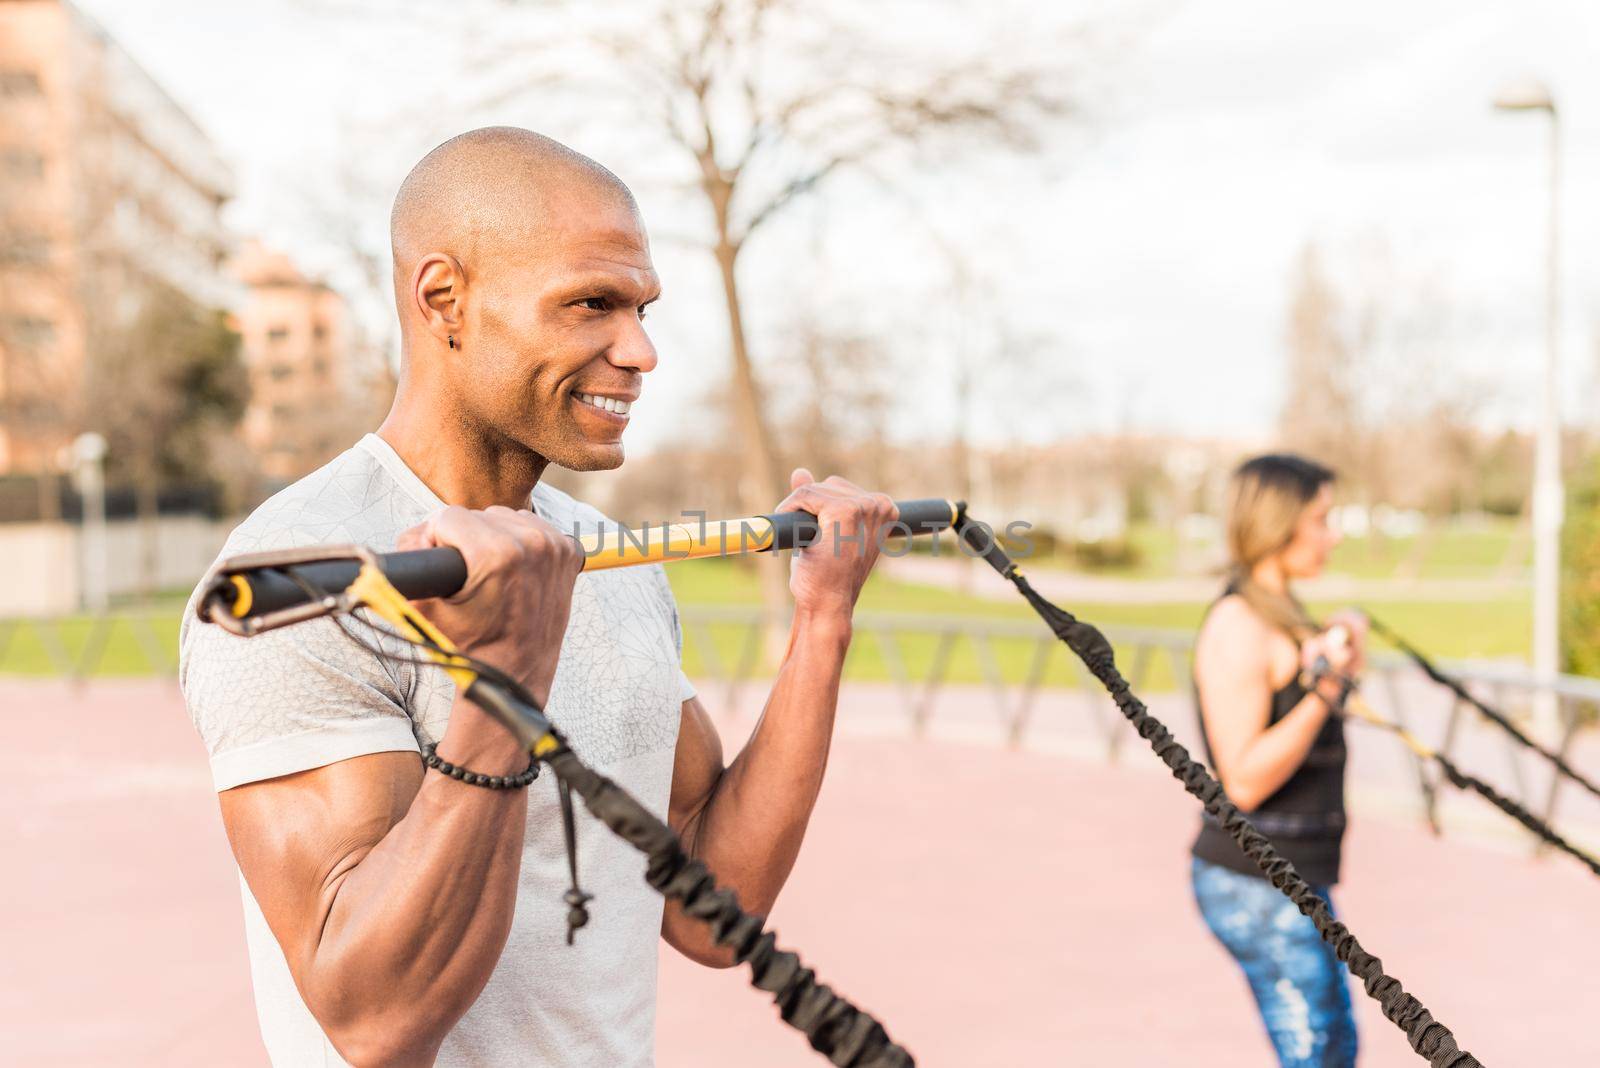 Athletic people exercising with an elastic gym stick in the park. Focus on sportsman. Multi-ethnic people exercising outside.